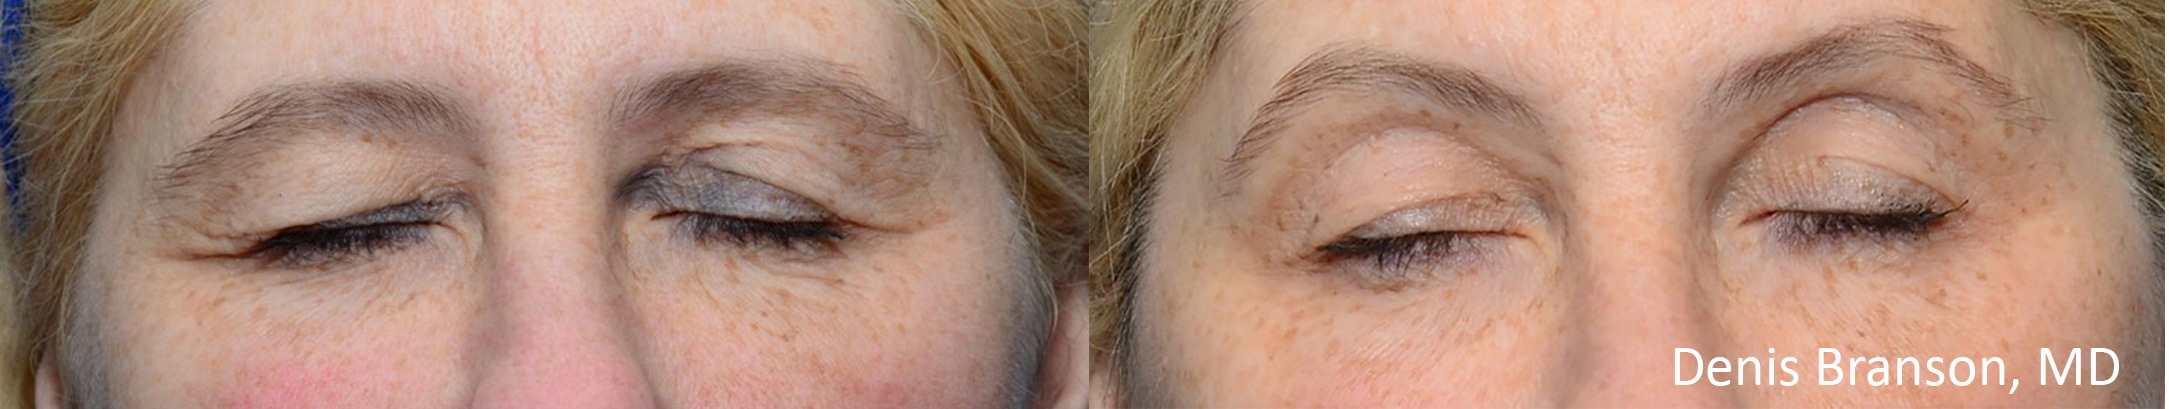 Thermismooth Db Eyes Before And After Serenity Medspa